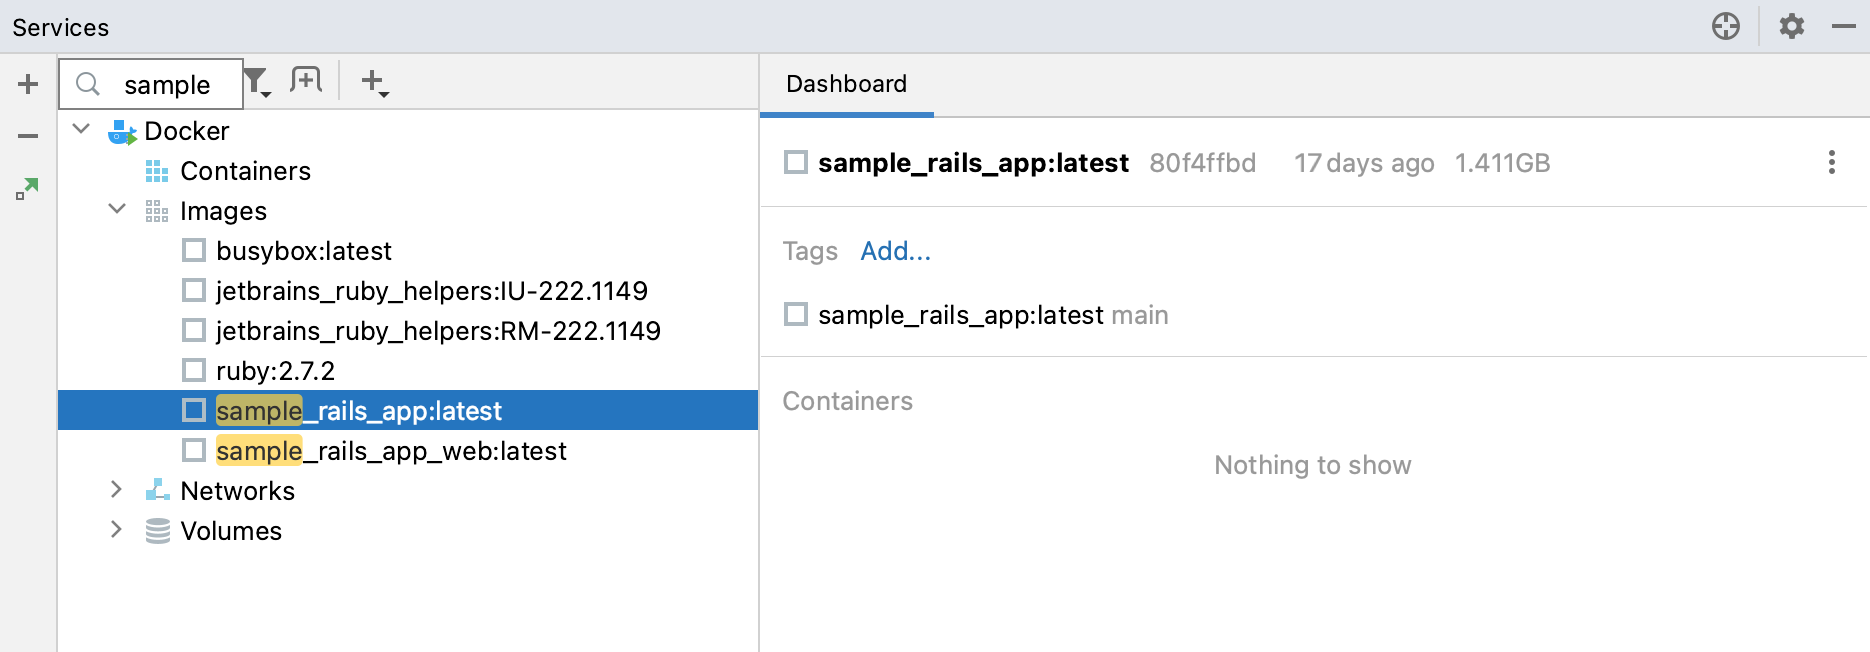 Search for a docker image in the Services tool window